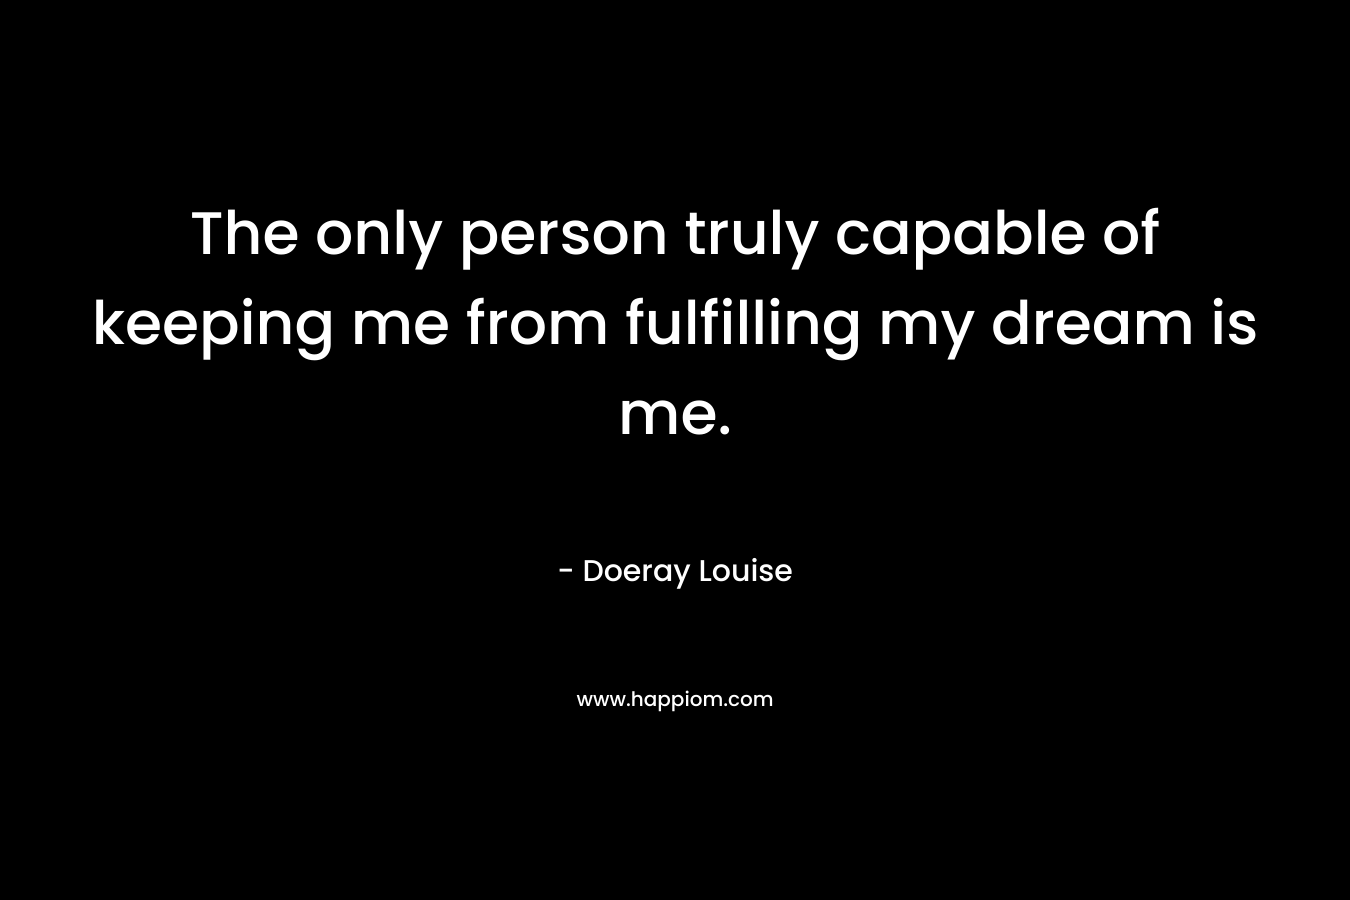 The only person truly capable of keeping me from fulfilling my dream is me. – Doeray Louise